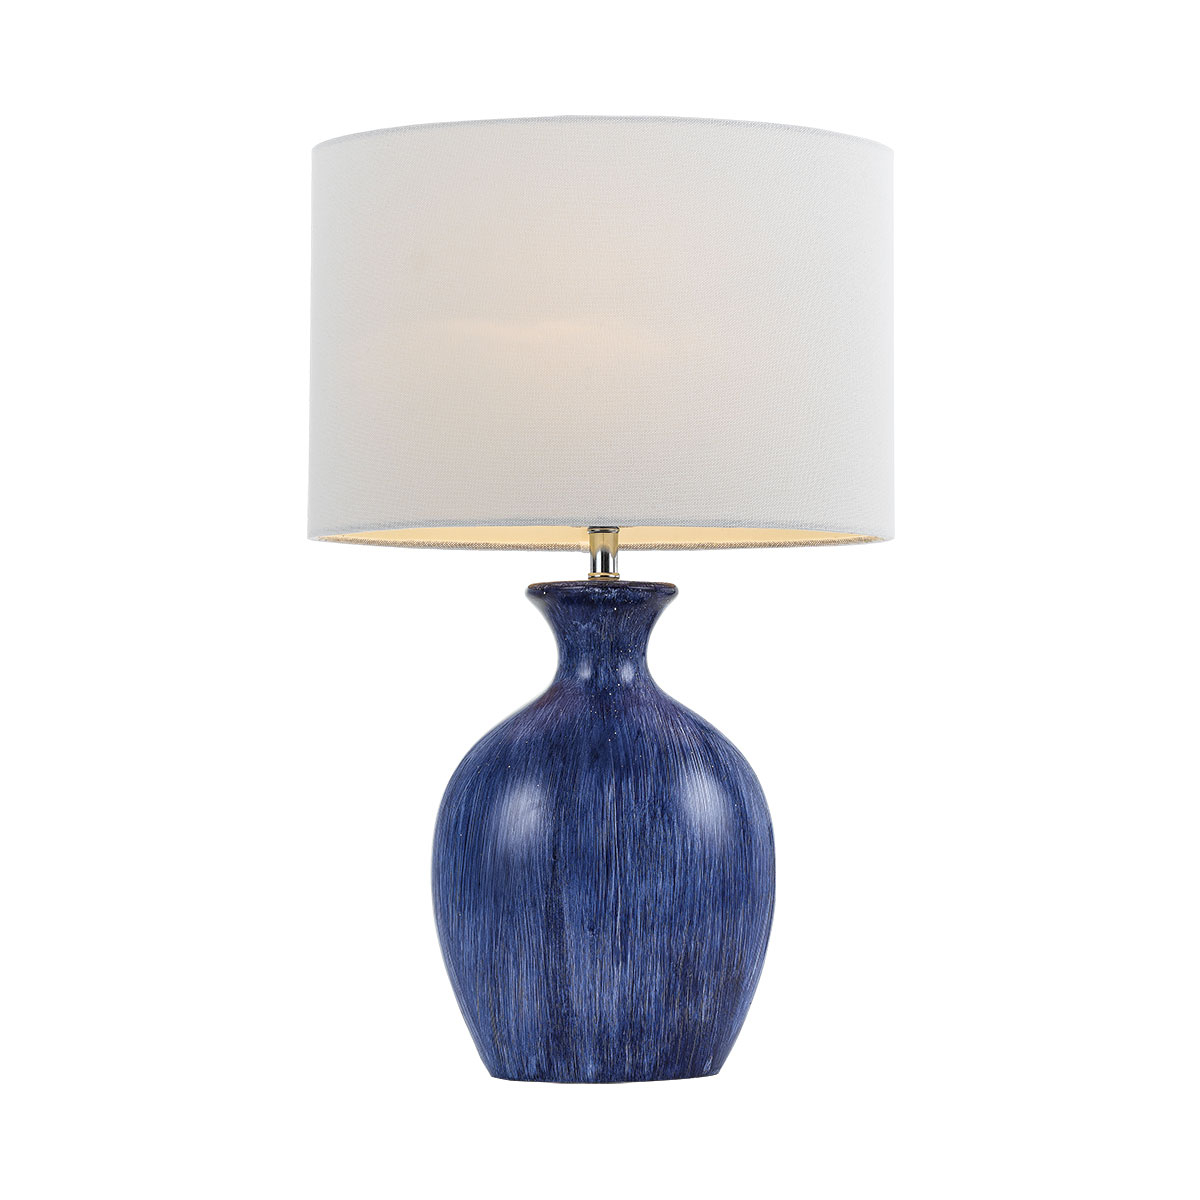 Panto 1 Light Ceamic Table Lamp Blue White Panto Tl Blwwh pertaining to sizing 1200 X 1200